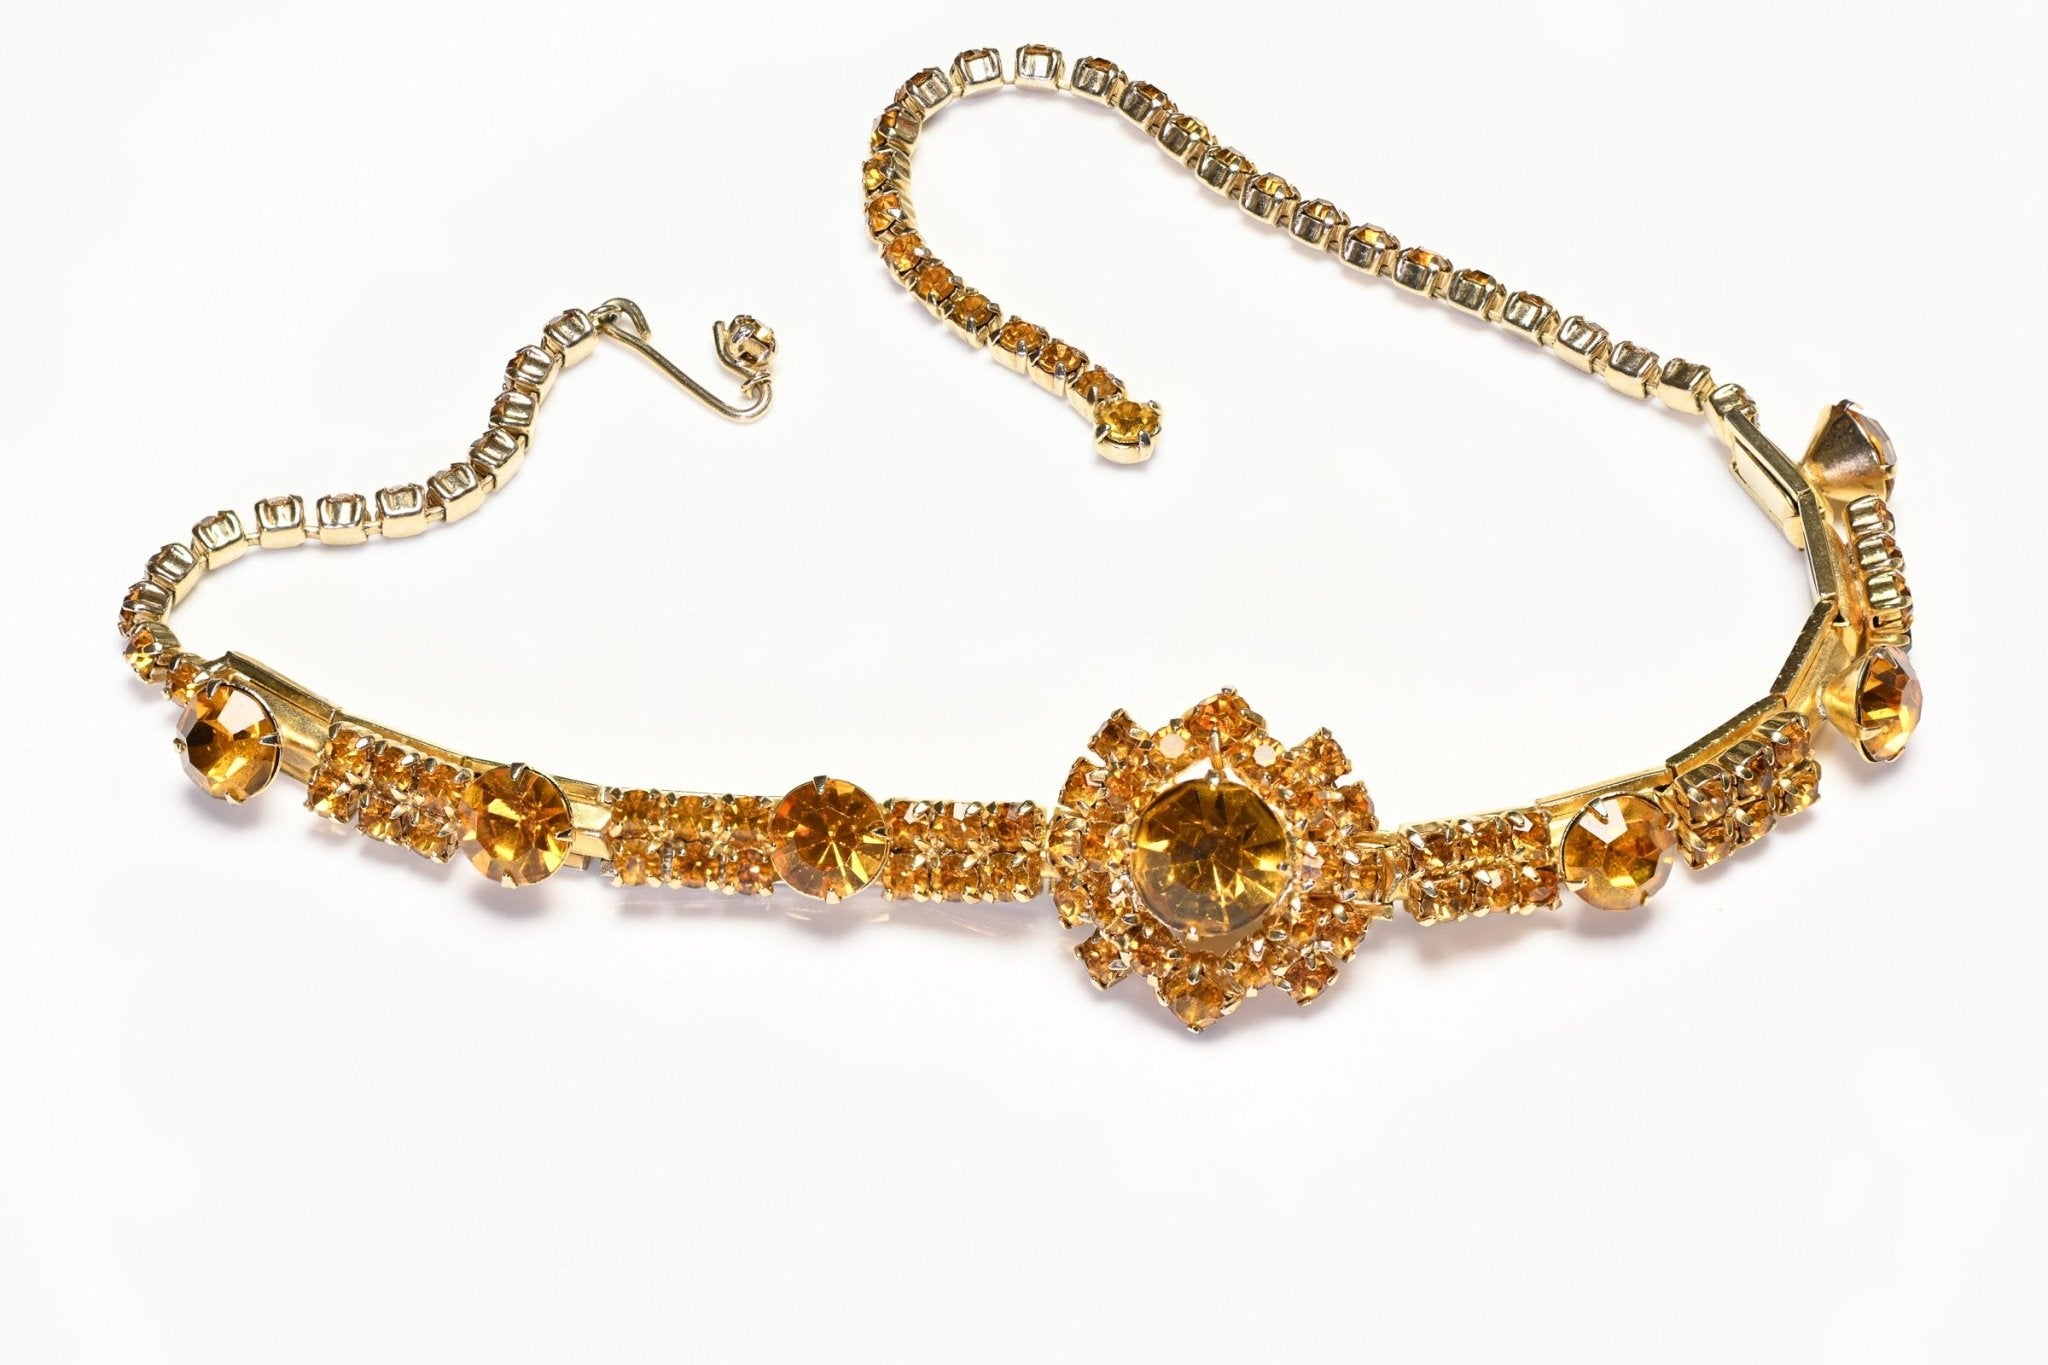 Vintage 1950’s Juliana Yellow Crystal Art Deco Style Expandable Choker Necklace